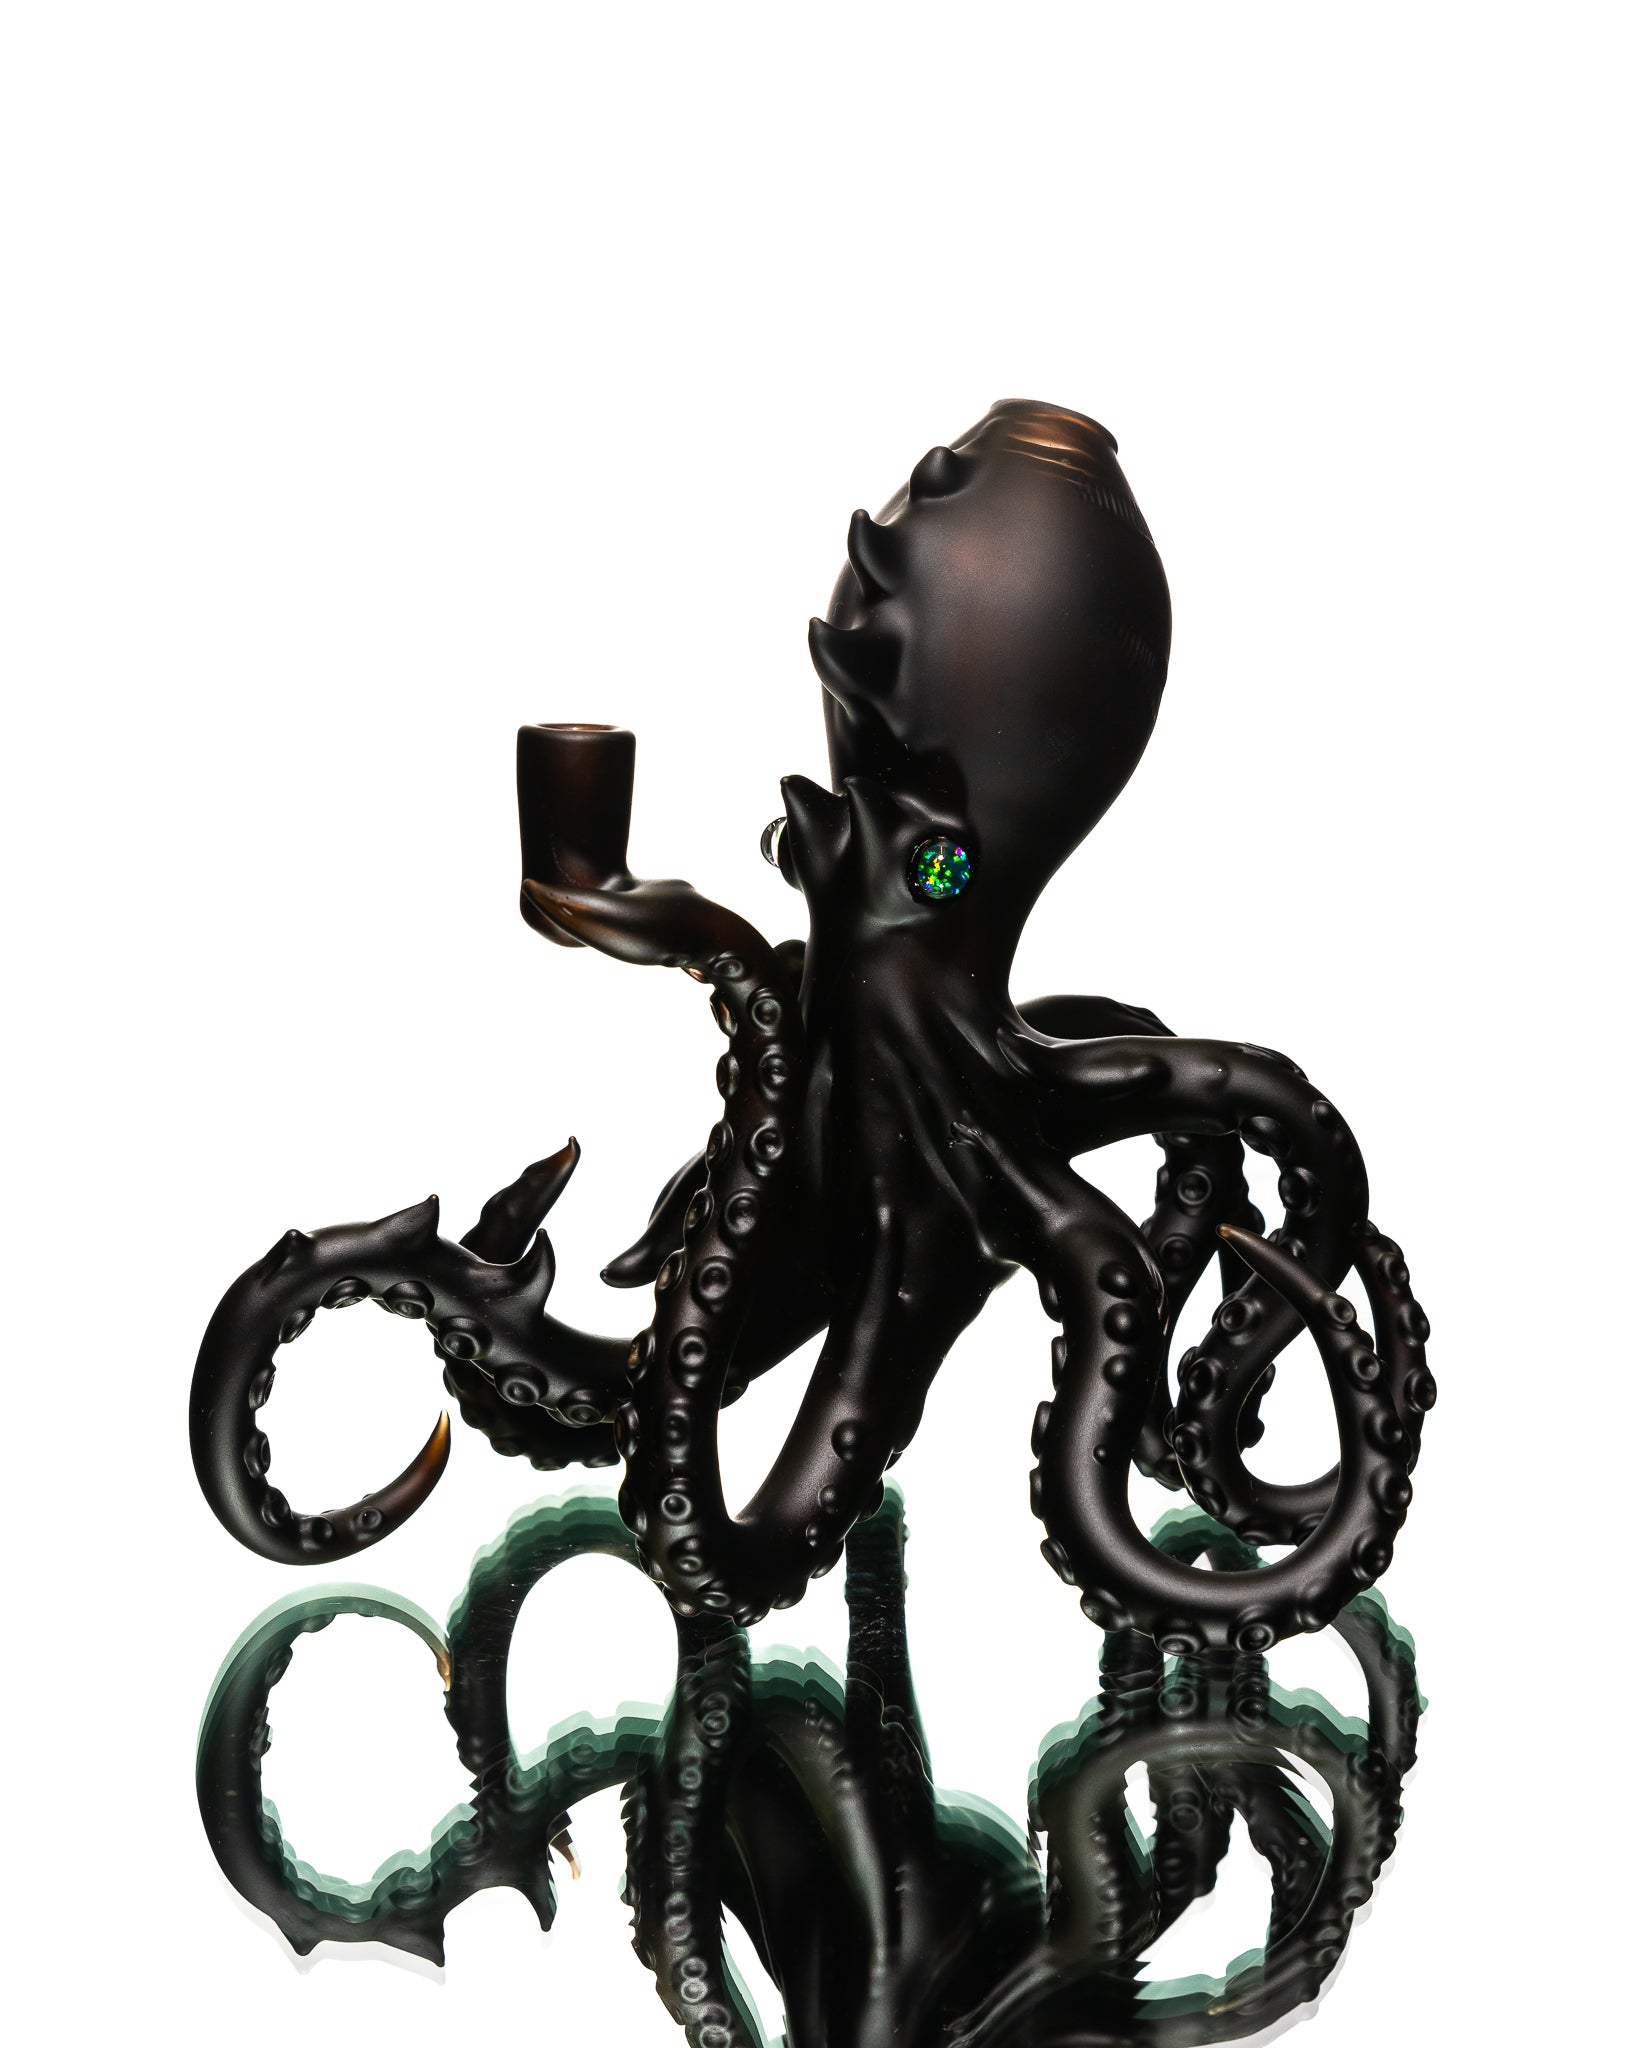 Wicked Glass - Black Octopus Rig